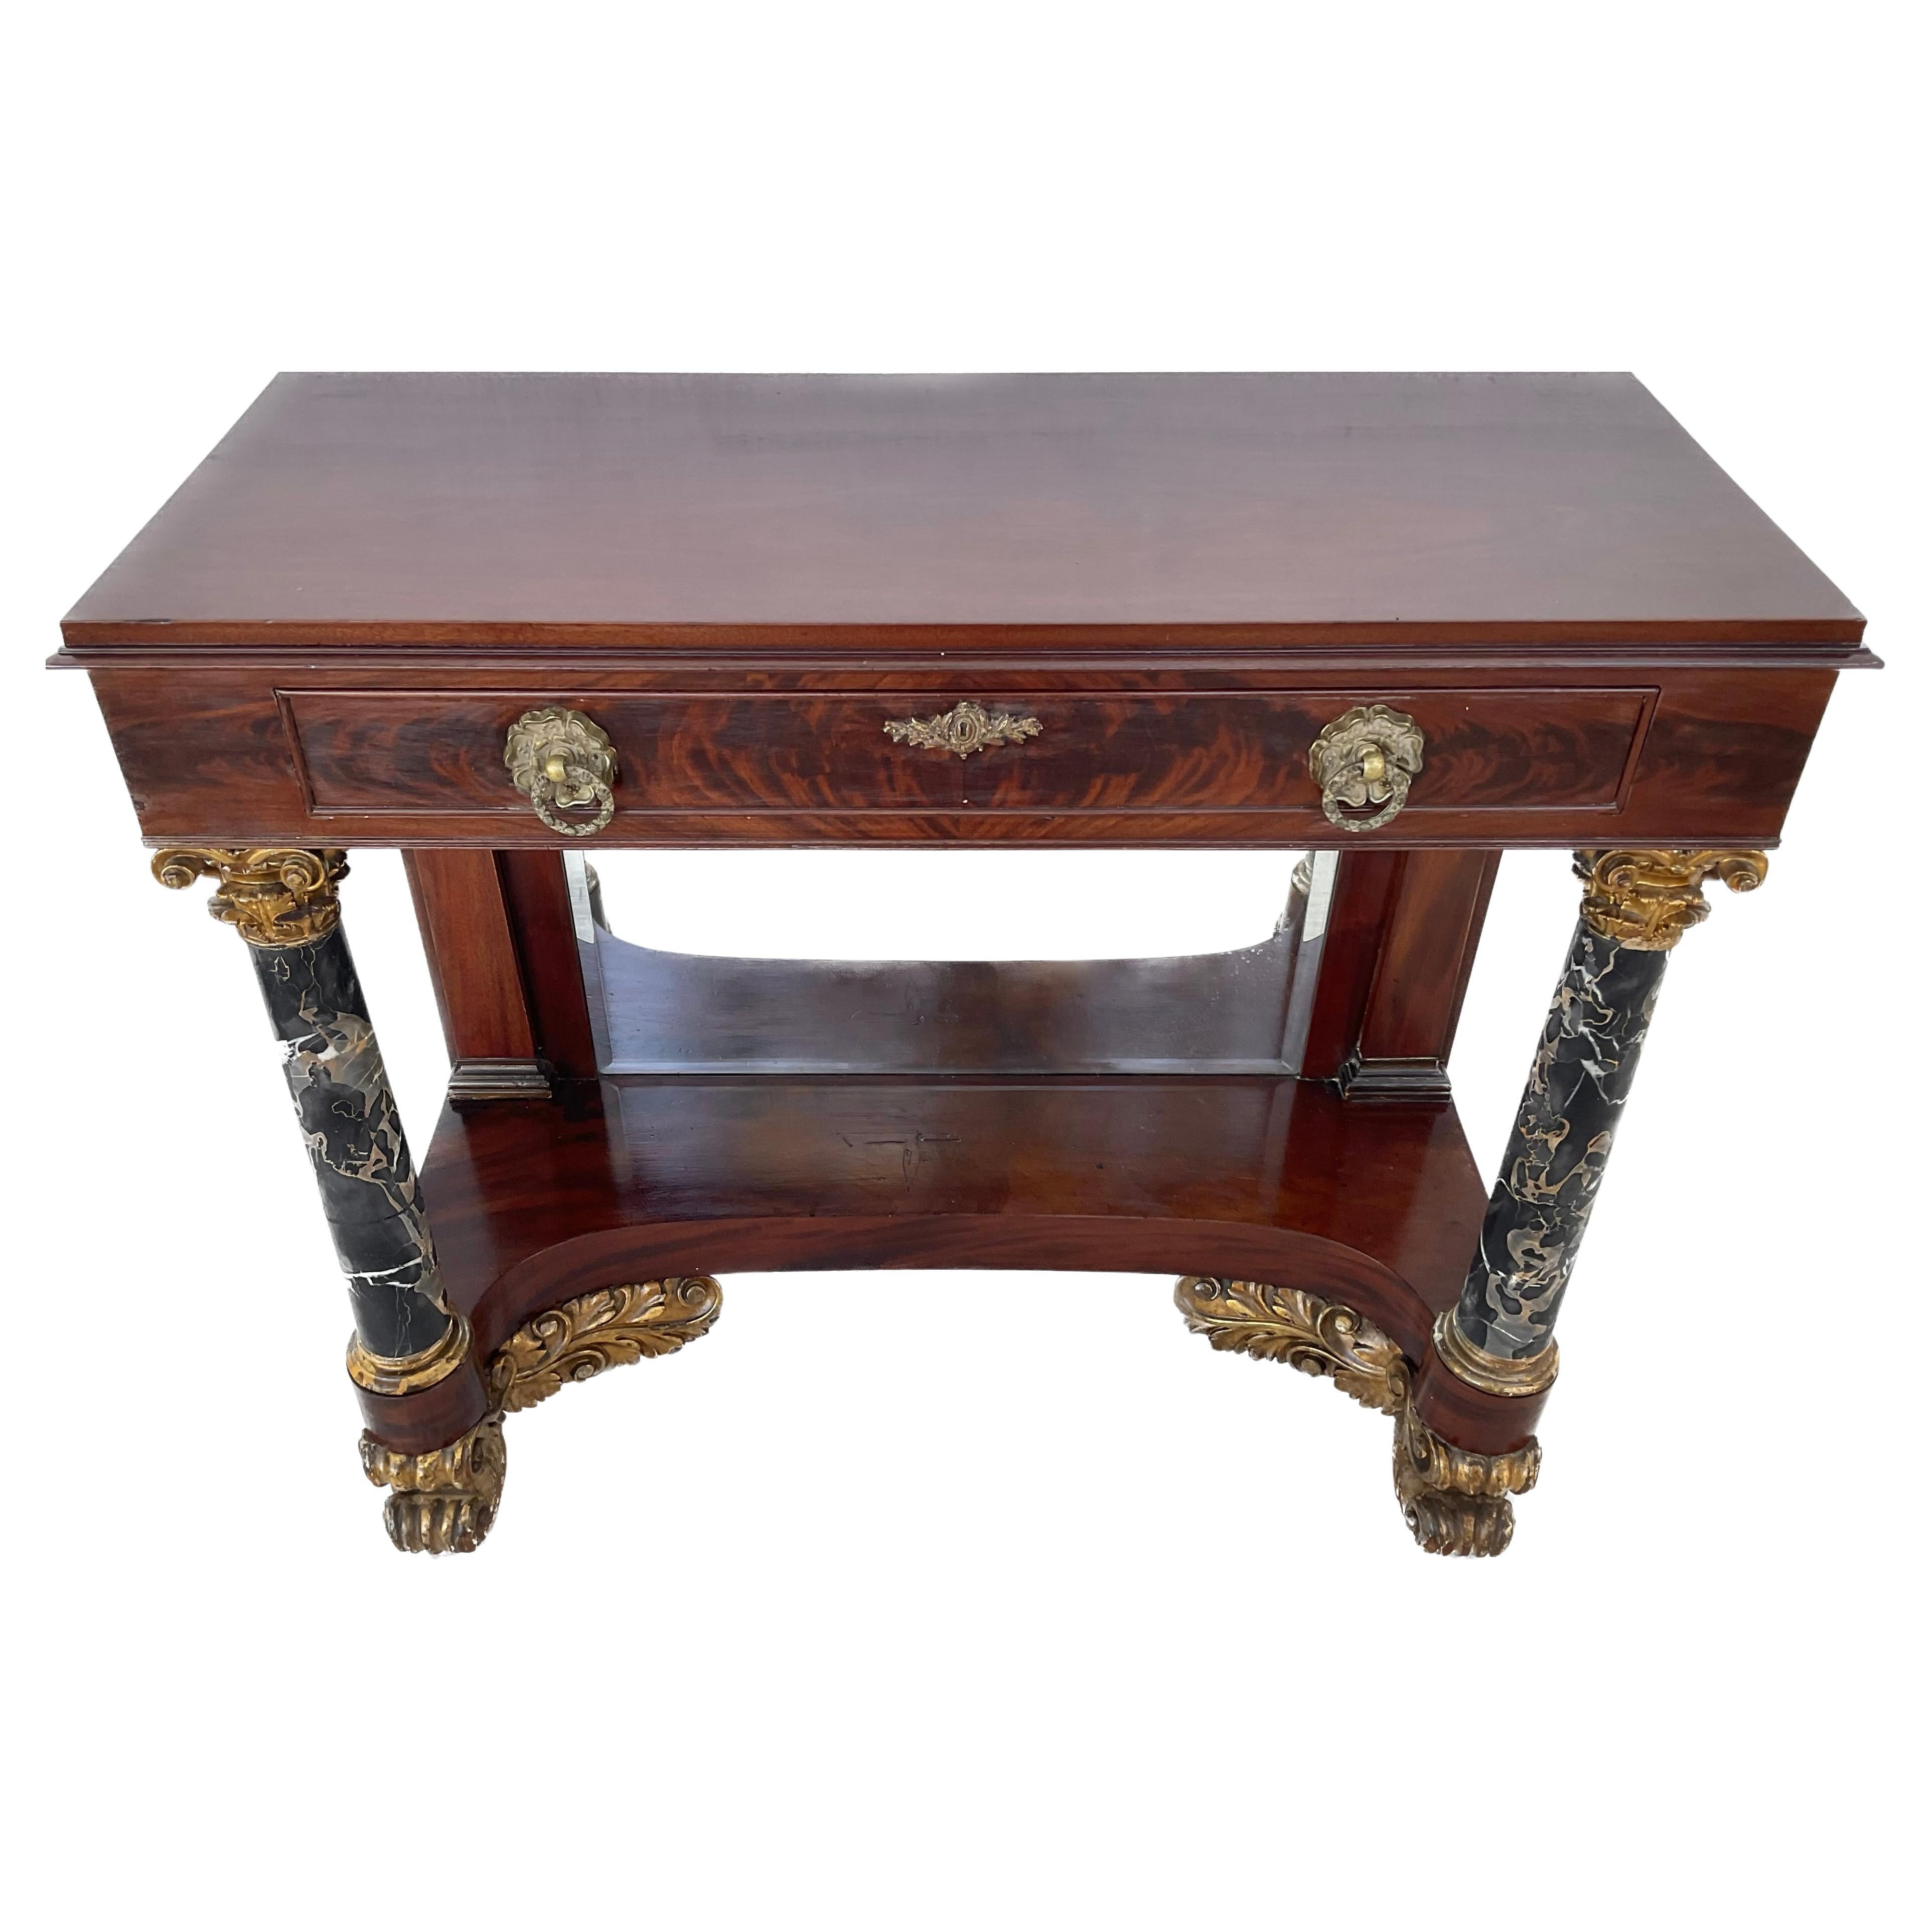 Handsome 19th century Federal period mahogany pier or console table. The table front is accented by ormolu rosettes and foliage decoration. Table features two front black and white swirled Portoro marble columns topped by gilt ormolu floral